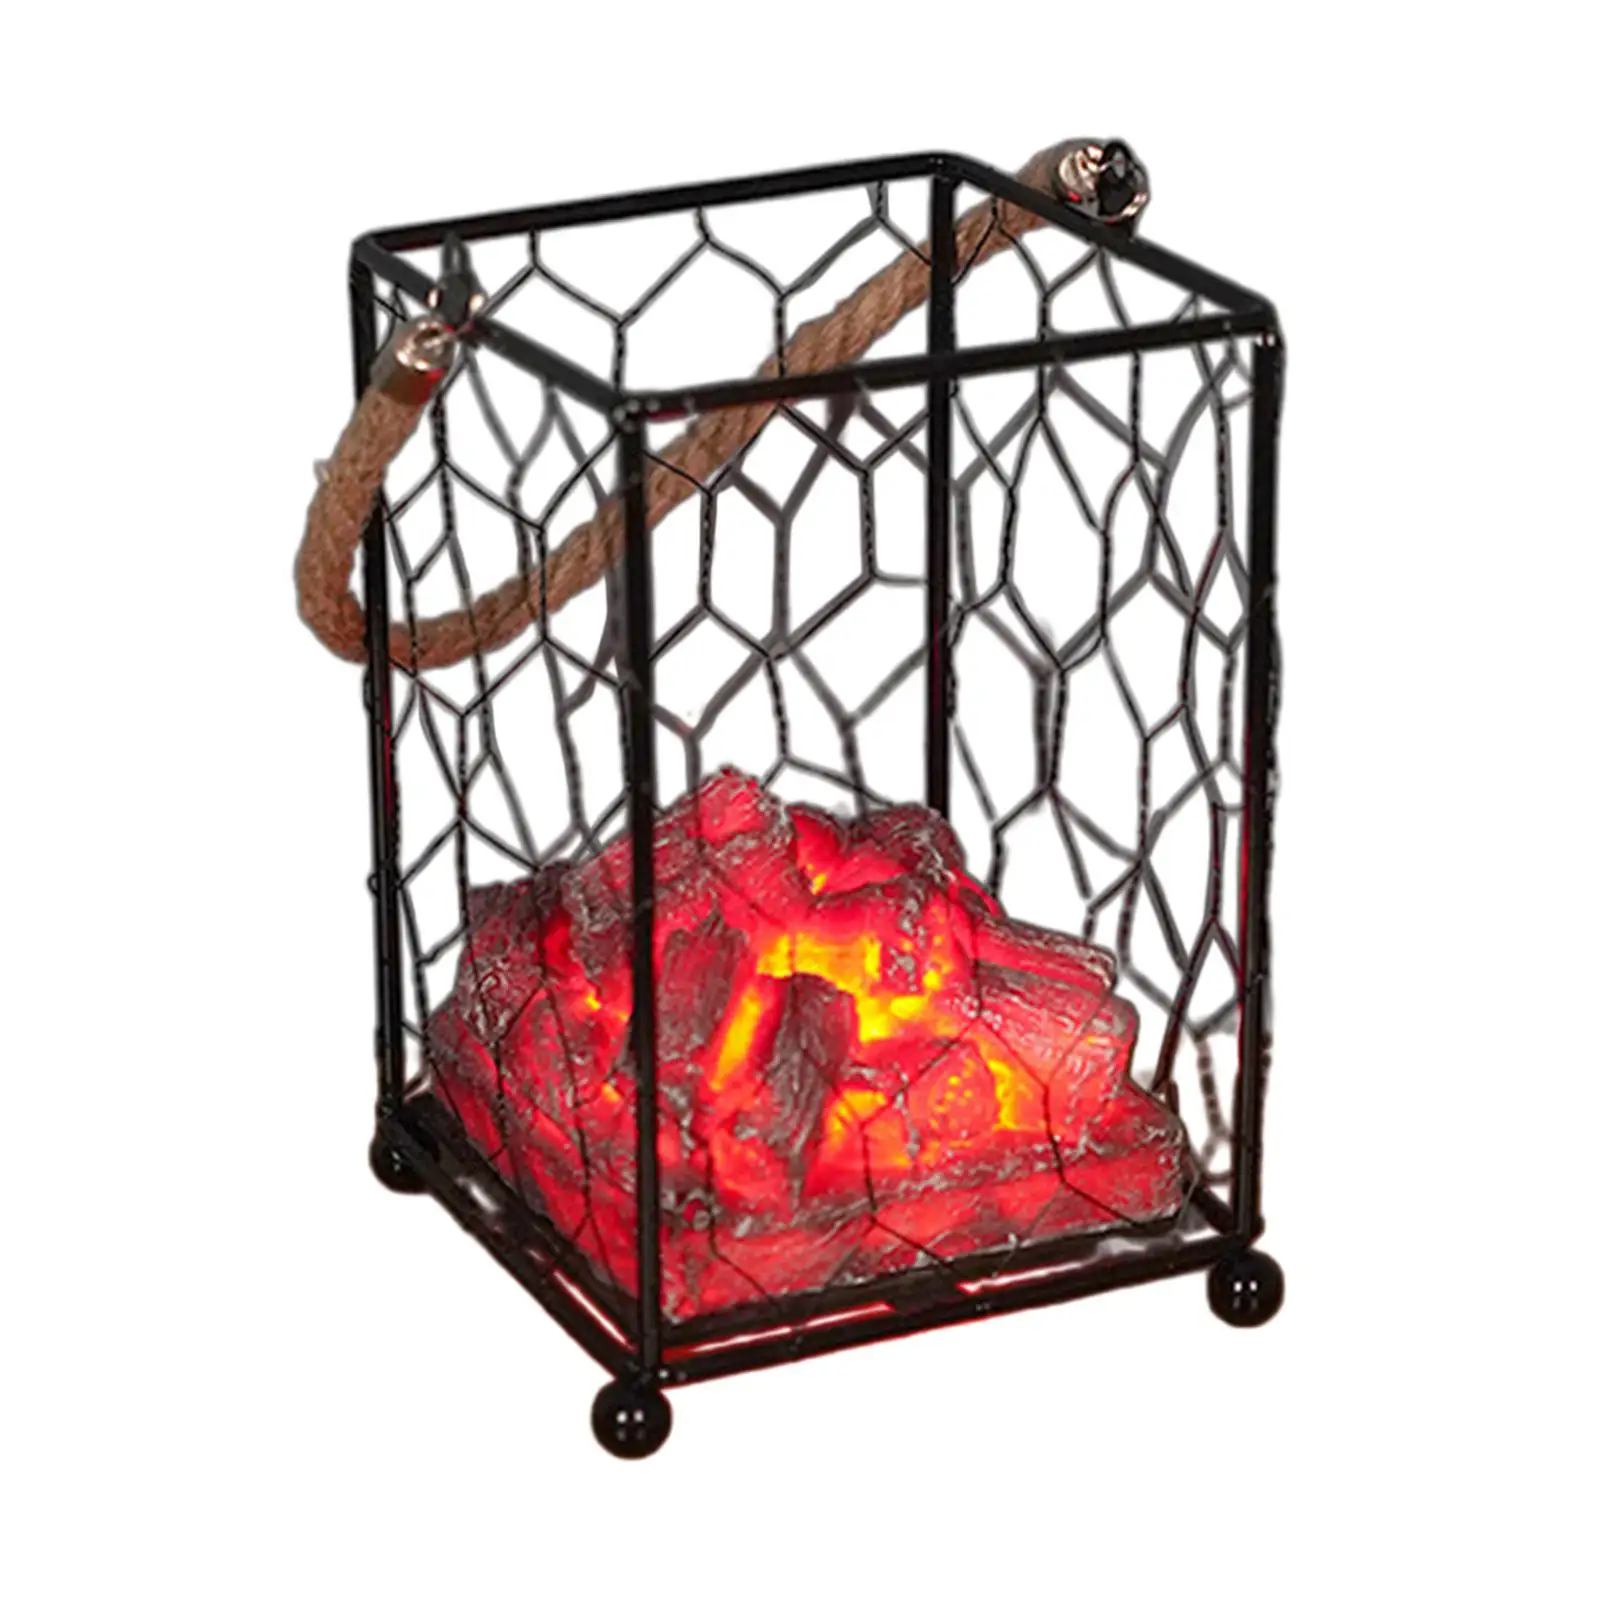 Charcoal Lamp Decoration Battery Operated Antique Portable Fireplace Lantern for Christmas Living Room